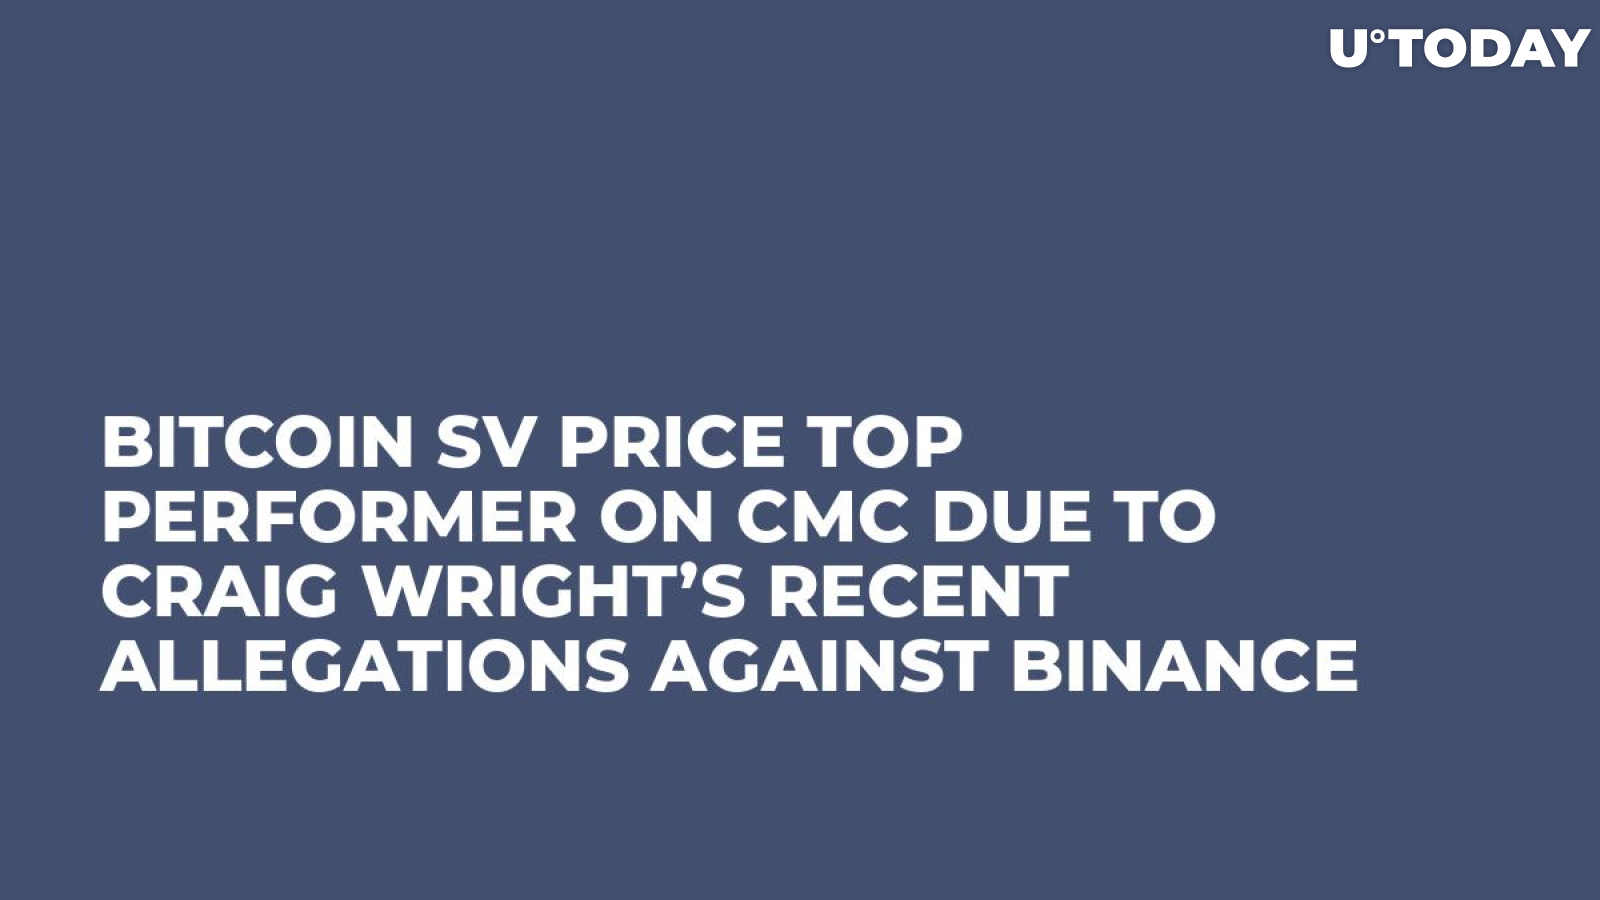 Bitcoin SV Price Top Performer on CMC Due to Craig Wright’s Recent Allegations Against Binance